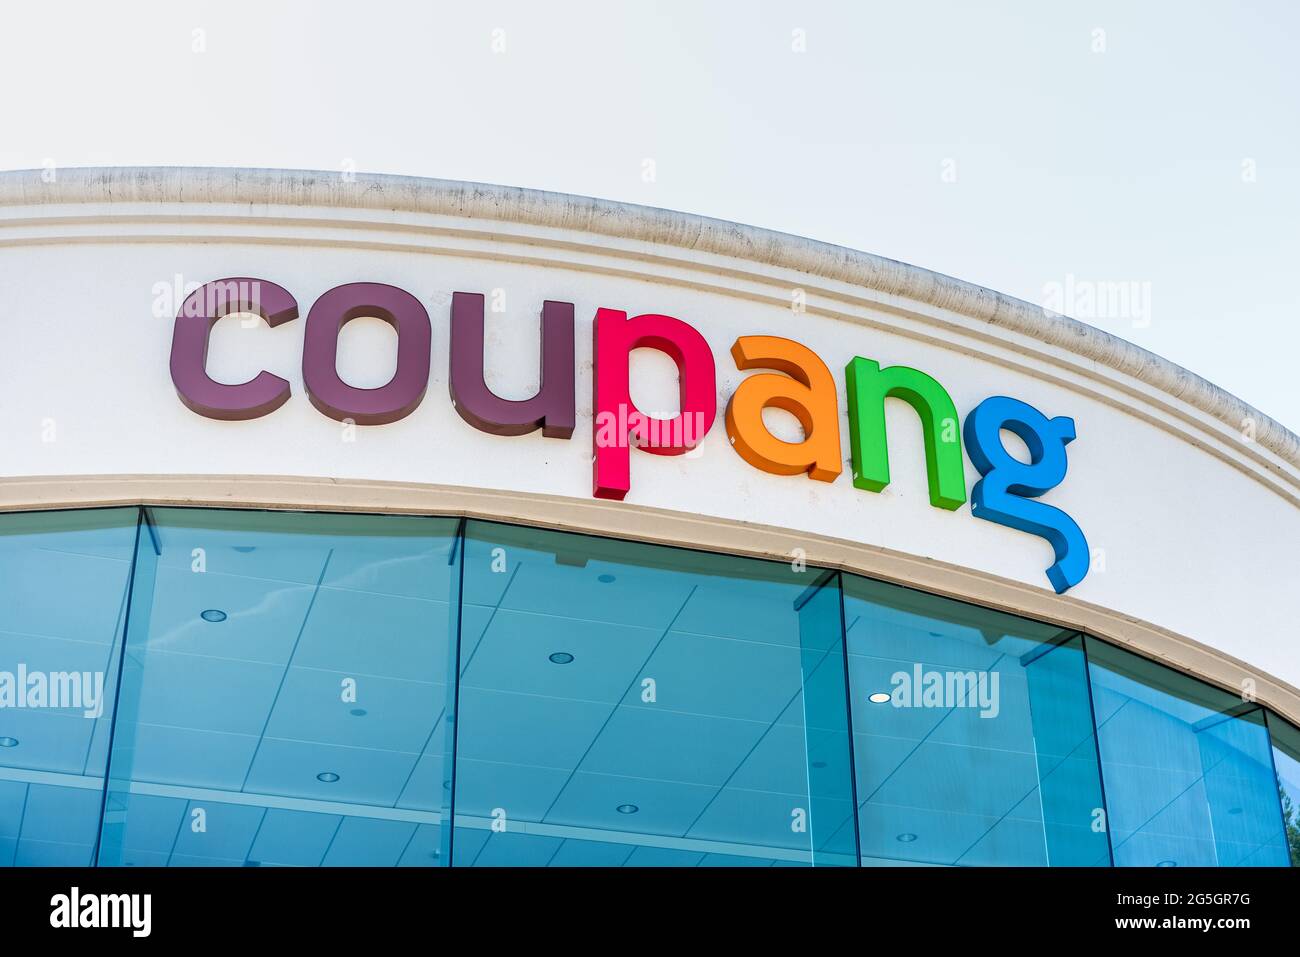 Sep 26, 2020 Mountain View / CA / USA - Coupang logo at their headquarters in Silicon Valley; Coupang Corporation is a South Korean e-commerce company Stock Photo